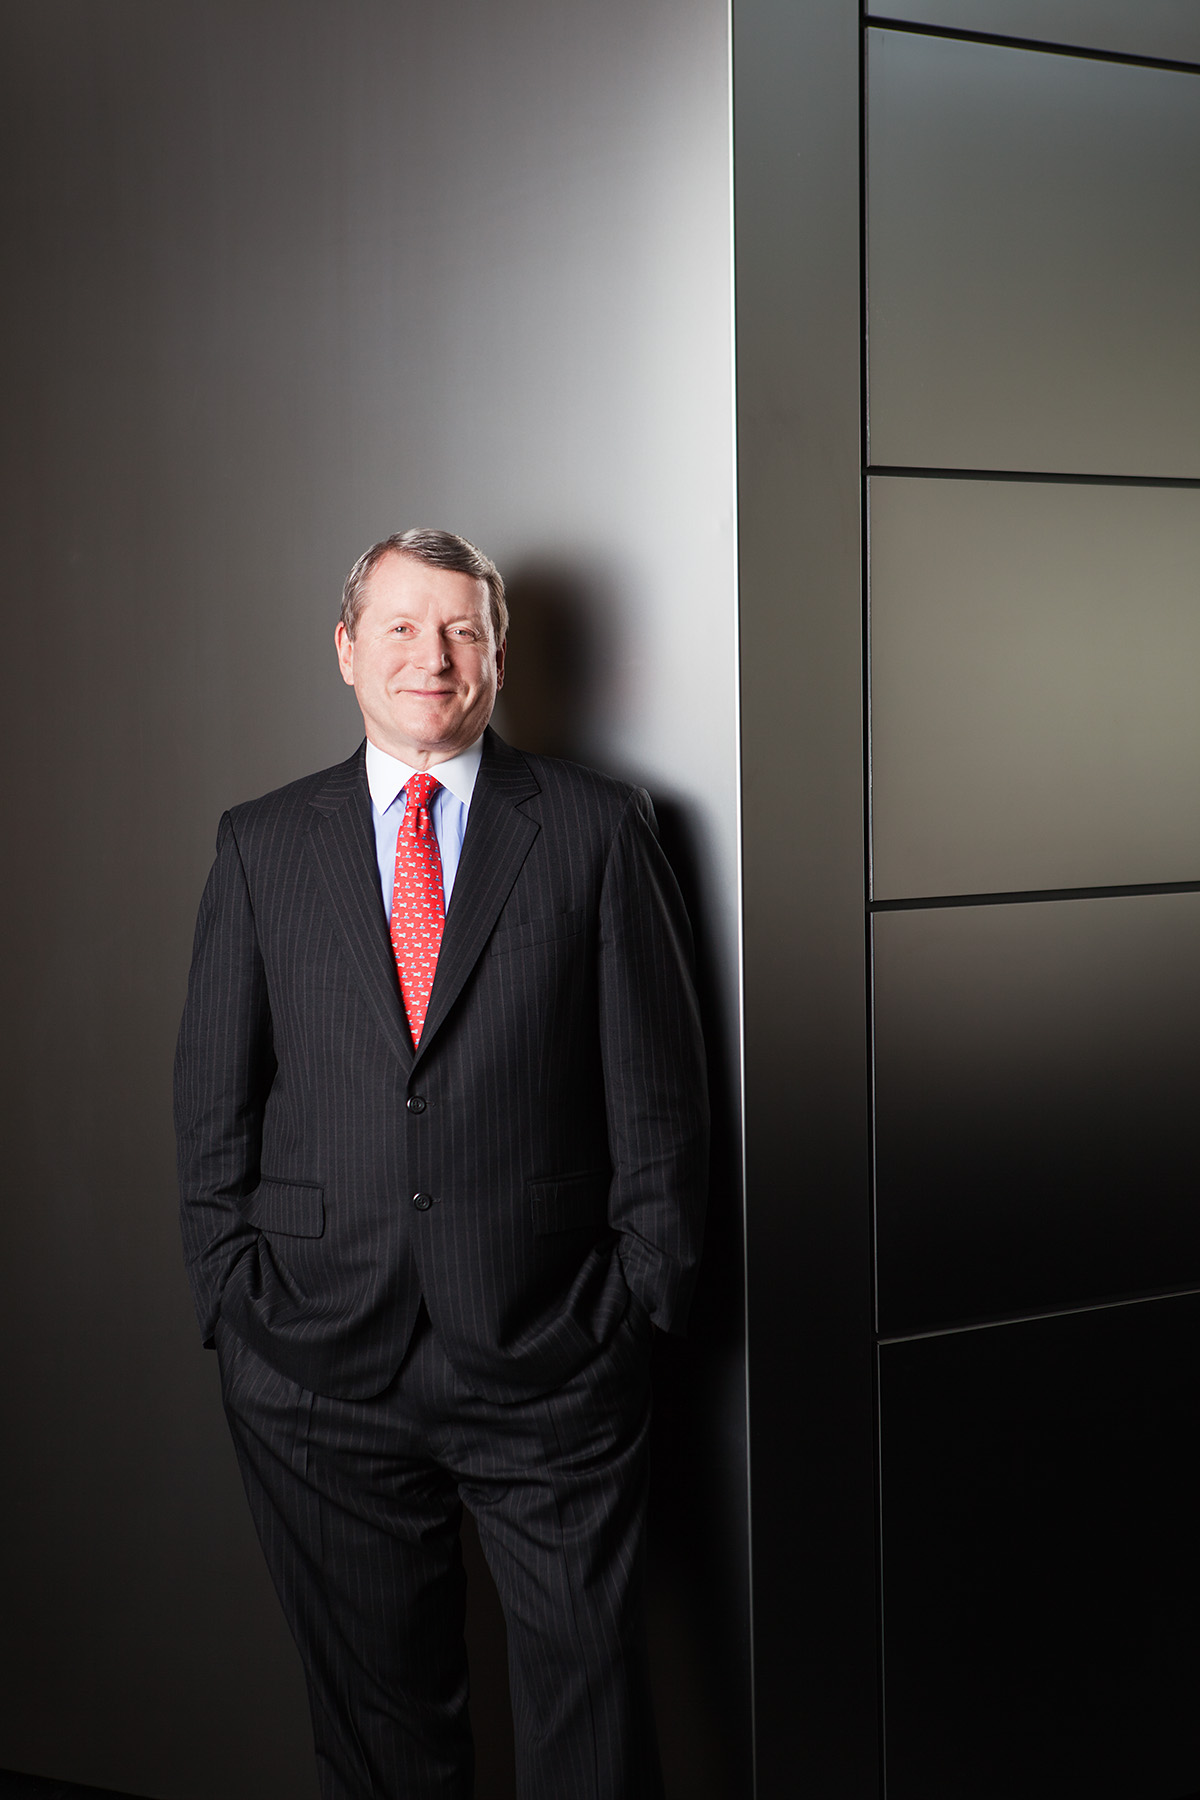 Robert Weber, photographed at IBM HQ in Westchester for Corporate Board Member magazine.